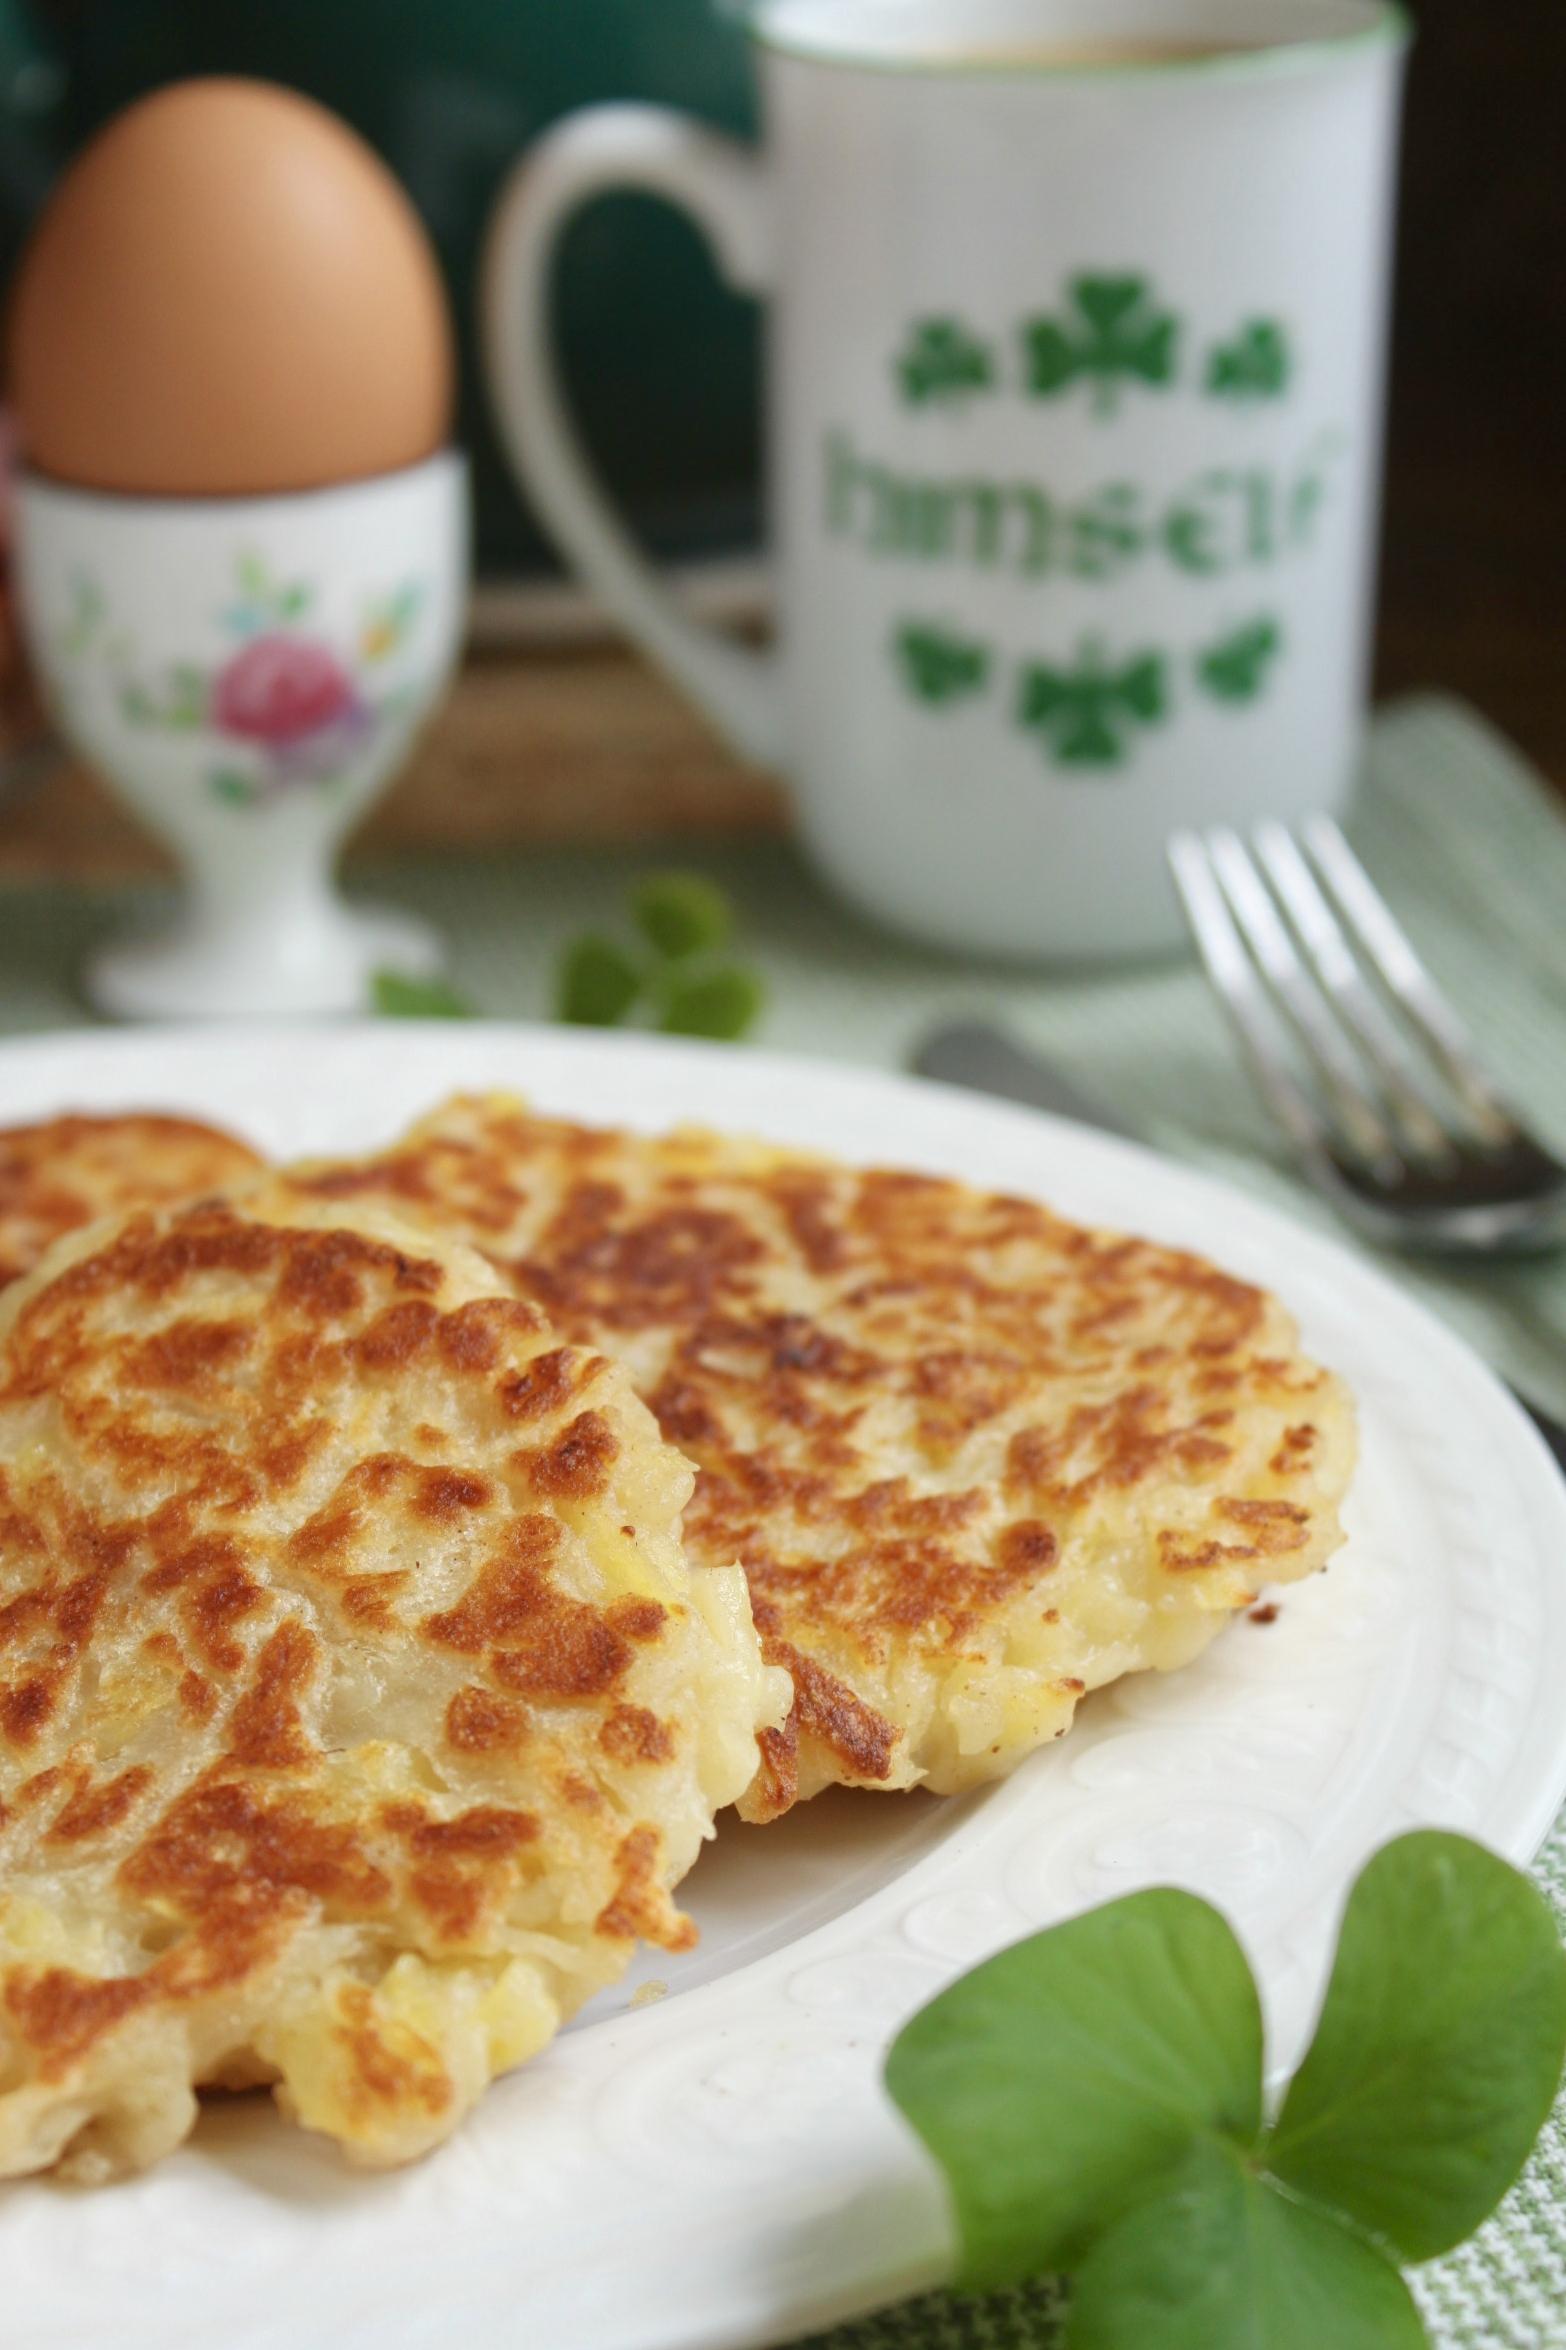  A pinch of chives, a dollop of butter, and a lot of love - that's what makes these boxty pancakes irresistible.